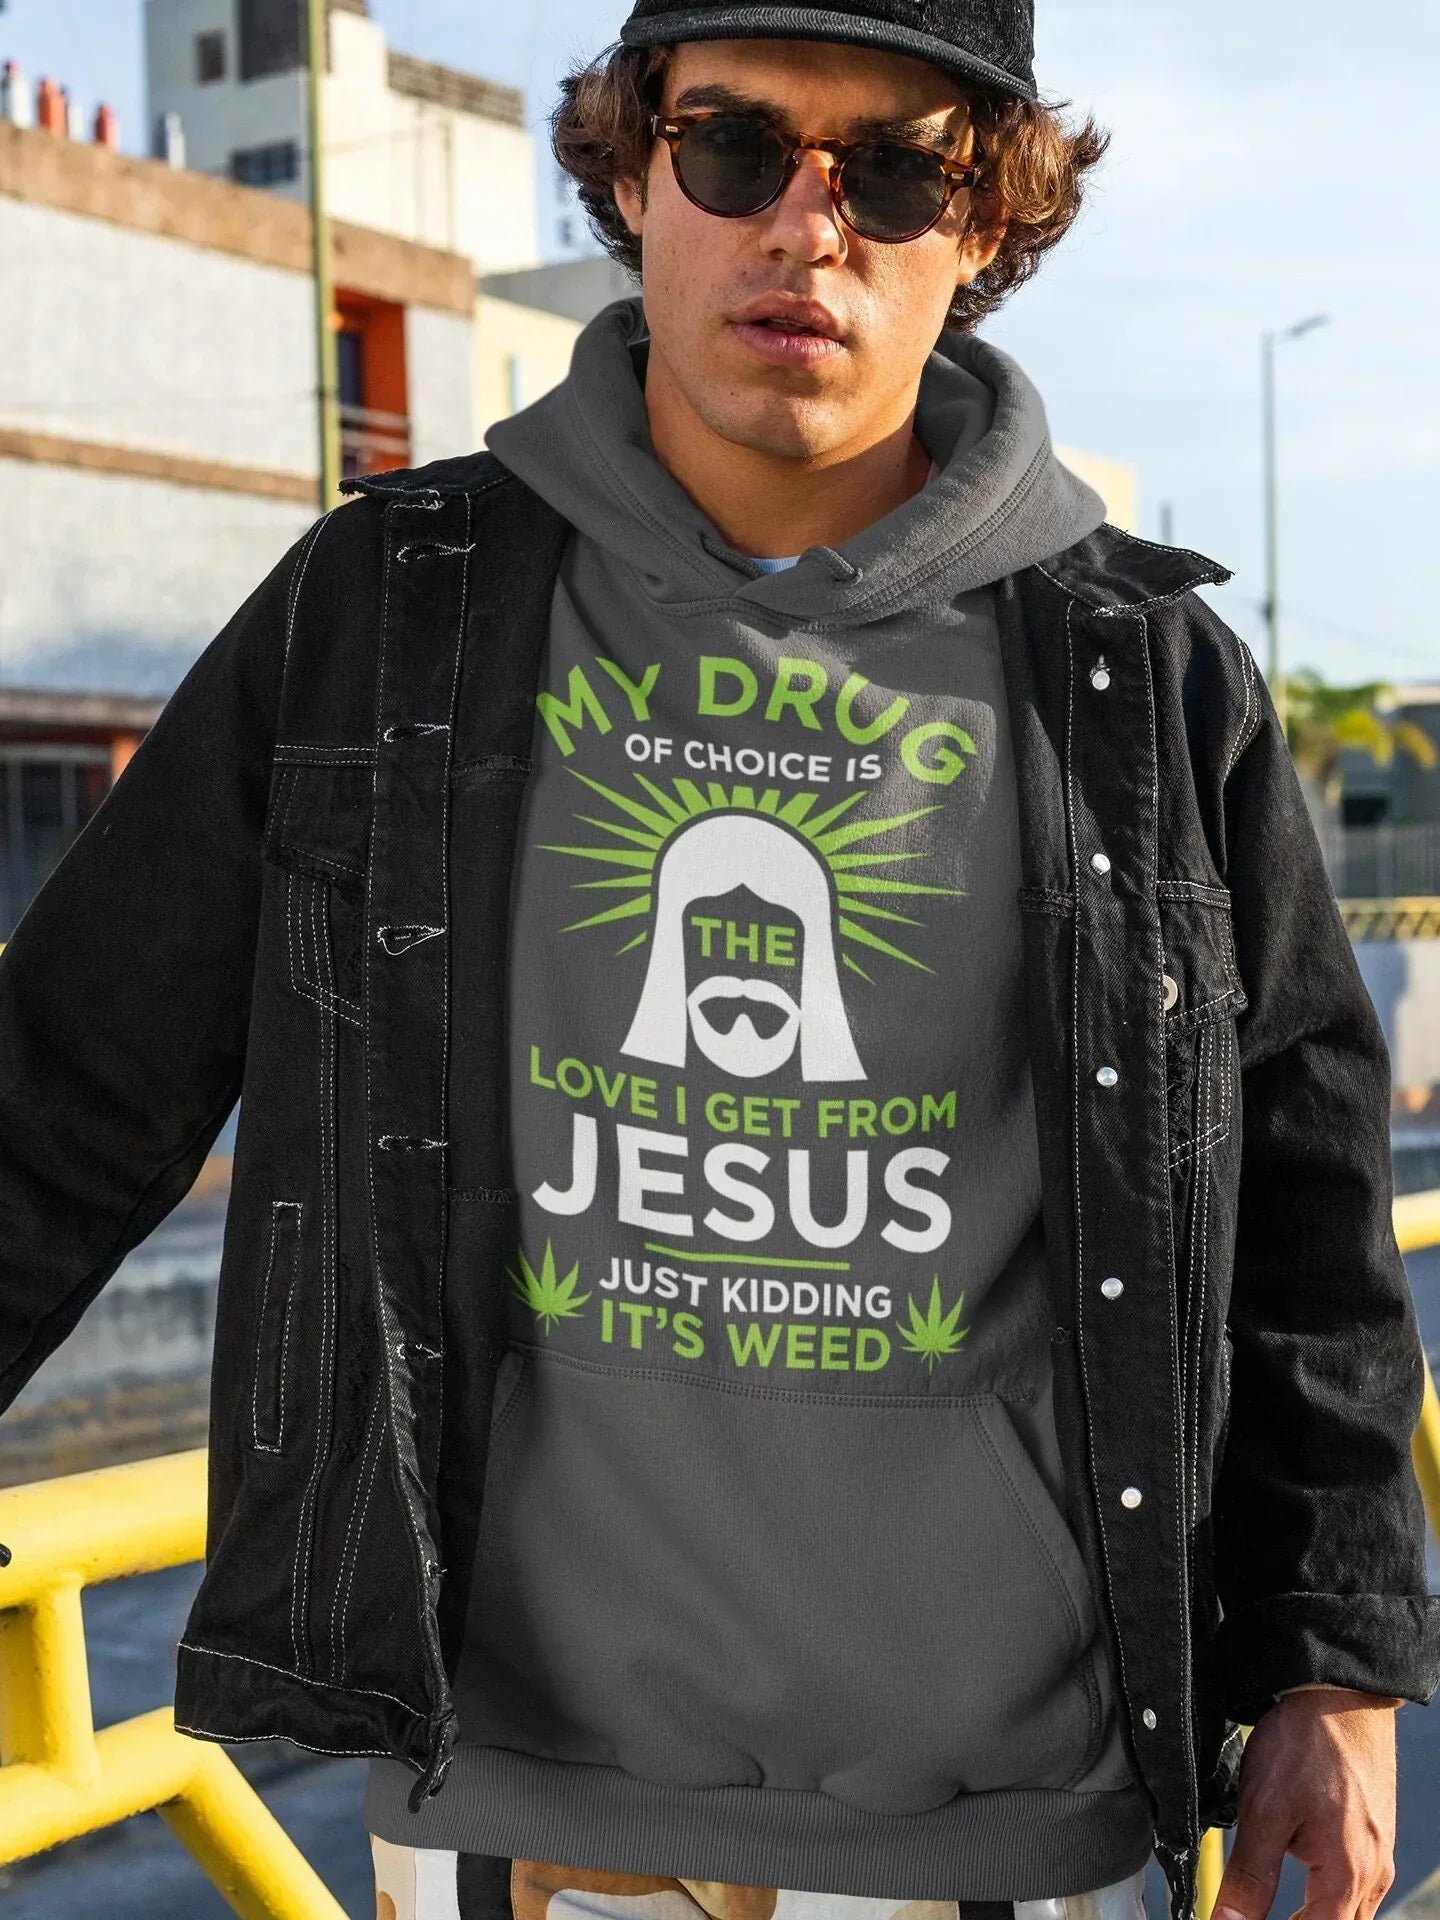 My Drug of Choice is the Love I Get From Jesus! Just Kidding IT Weed! 😁